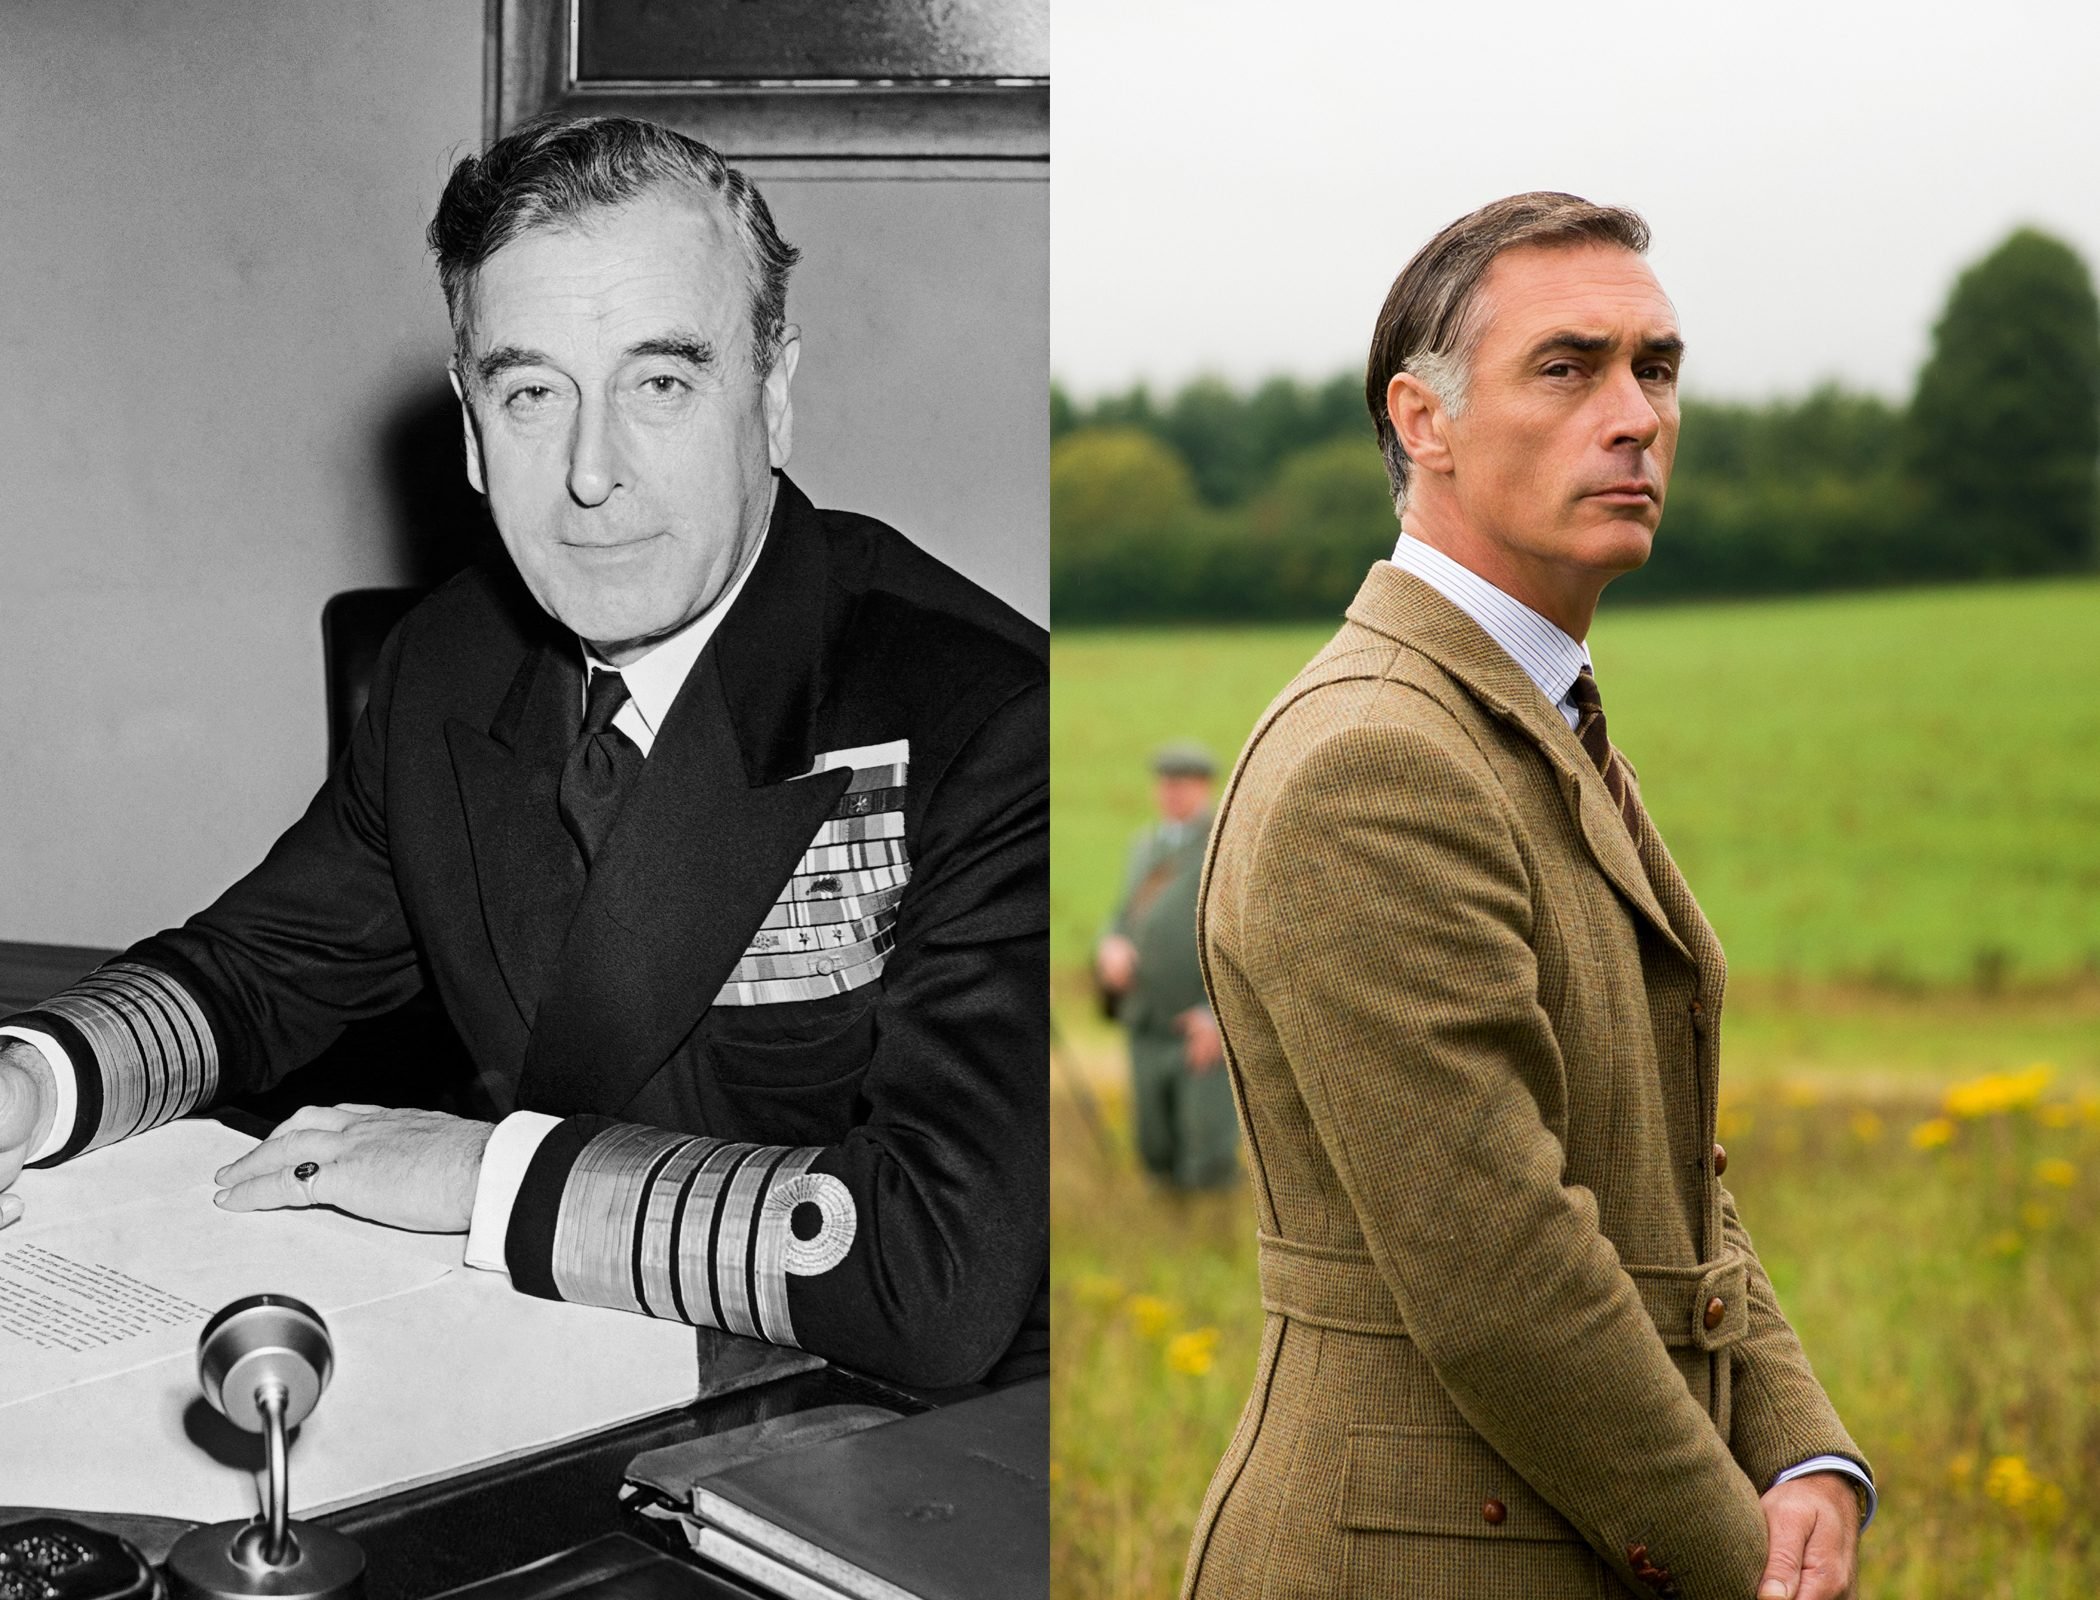 Lord Louis Mountbatten (aka Uncle Dickie), as played by Greg Wise